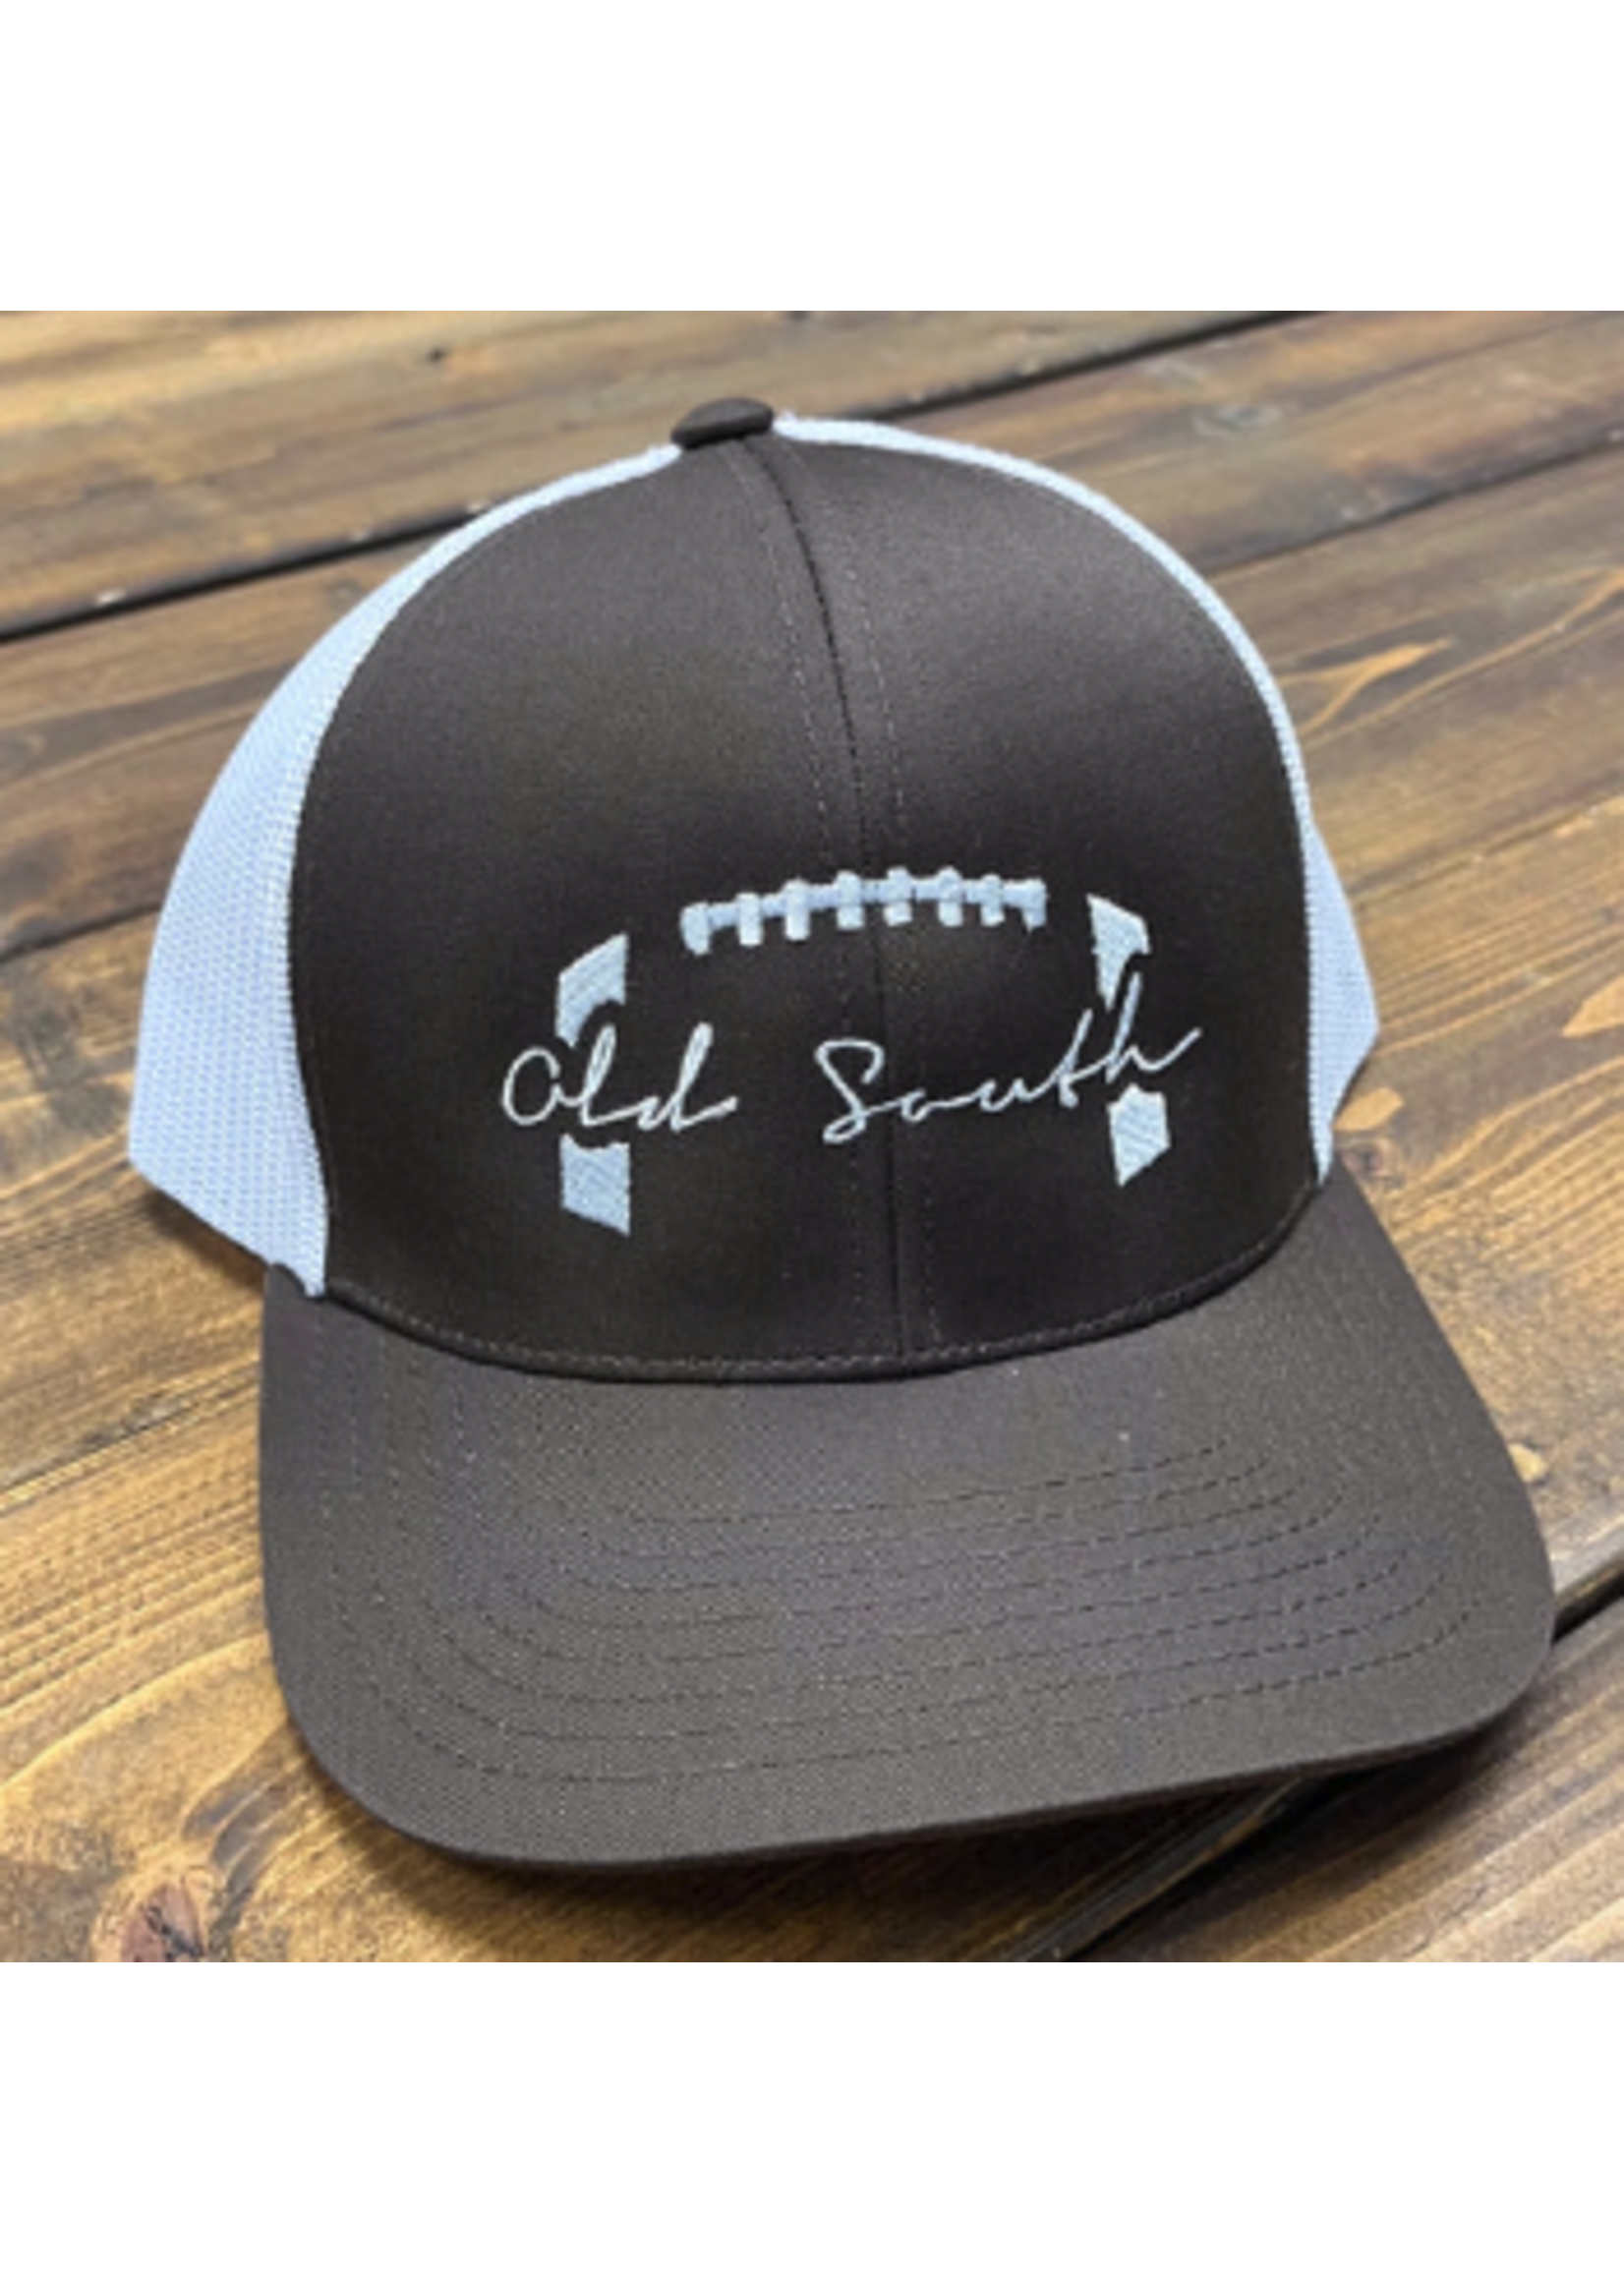 Old South Football Stitched Trucker Hat